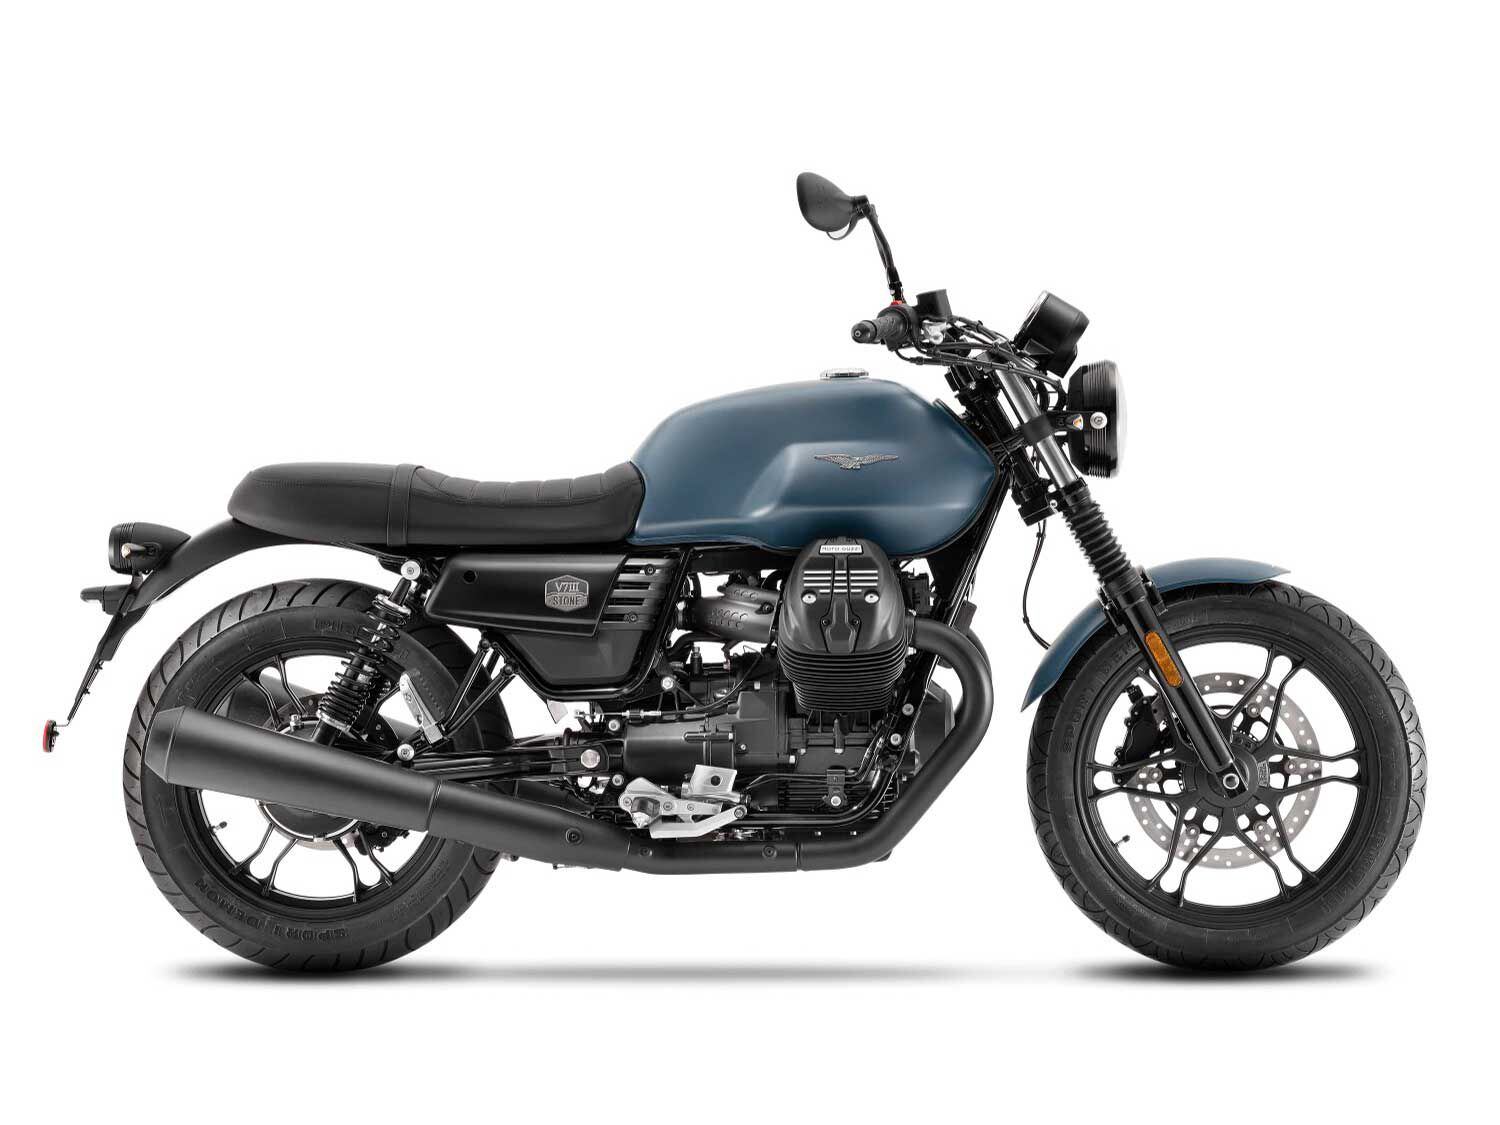 Basic but subtly classic all at once, the newer Guzzi V7 III maintains the brand’s sporting middleweight lineage while remaining an enjoyable yet accessible ride.